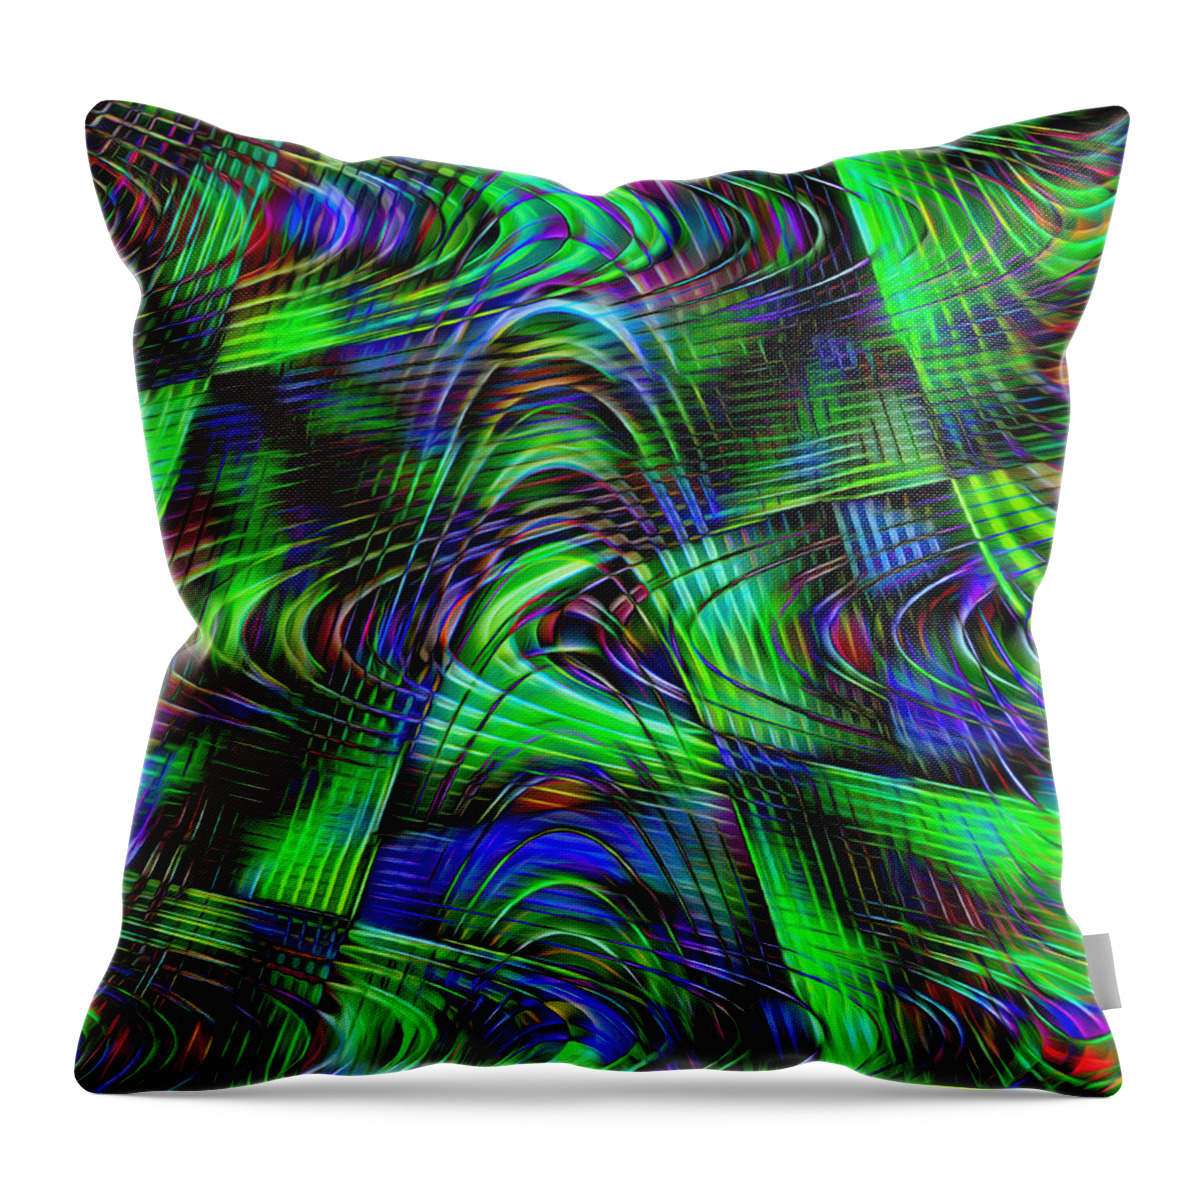 Abstract Throw Pillow featuring the digital art Twilight zone by Galeria Trompiz